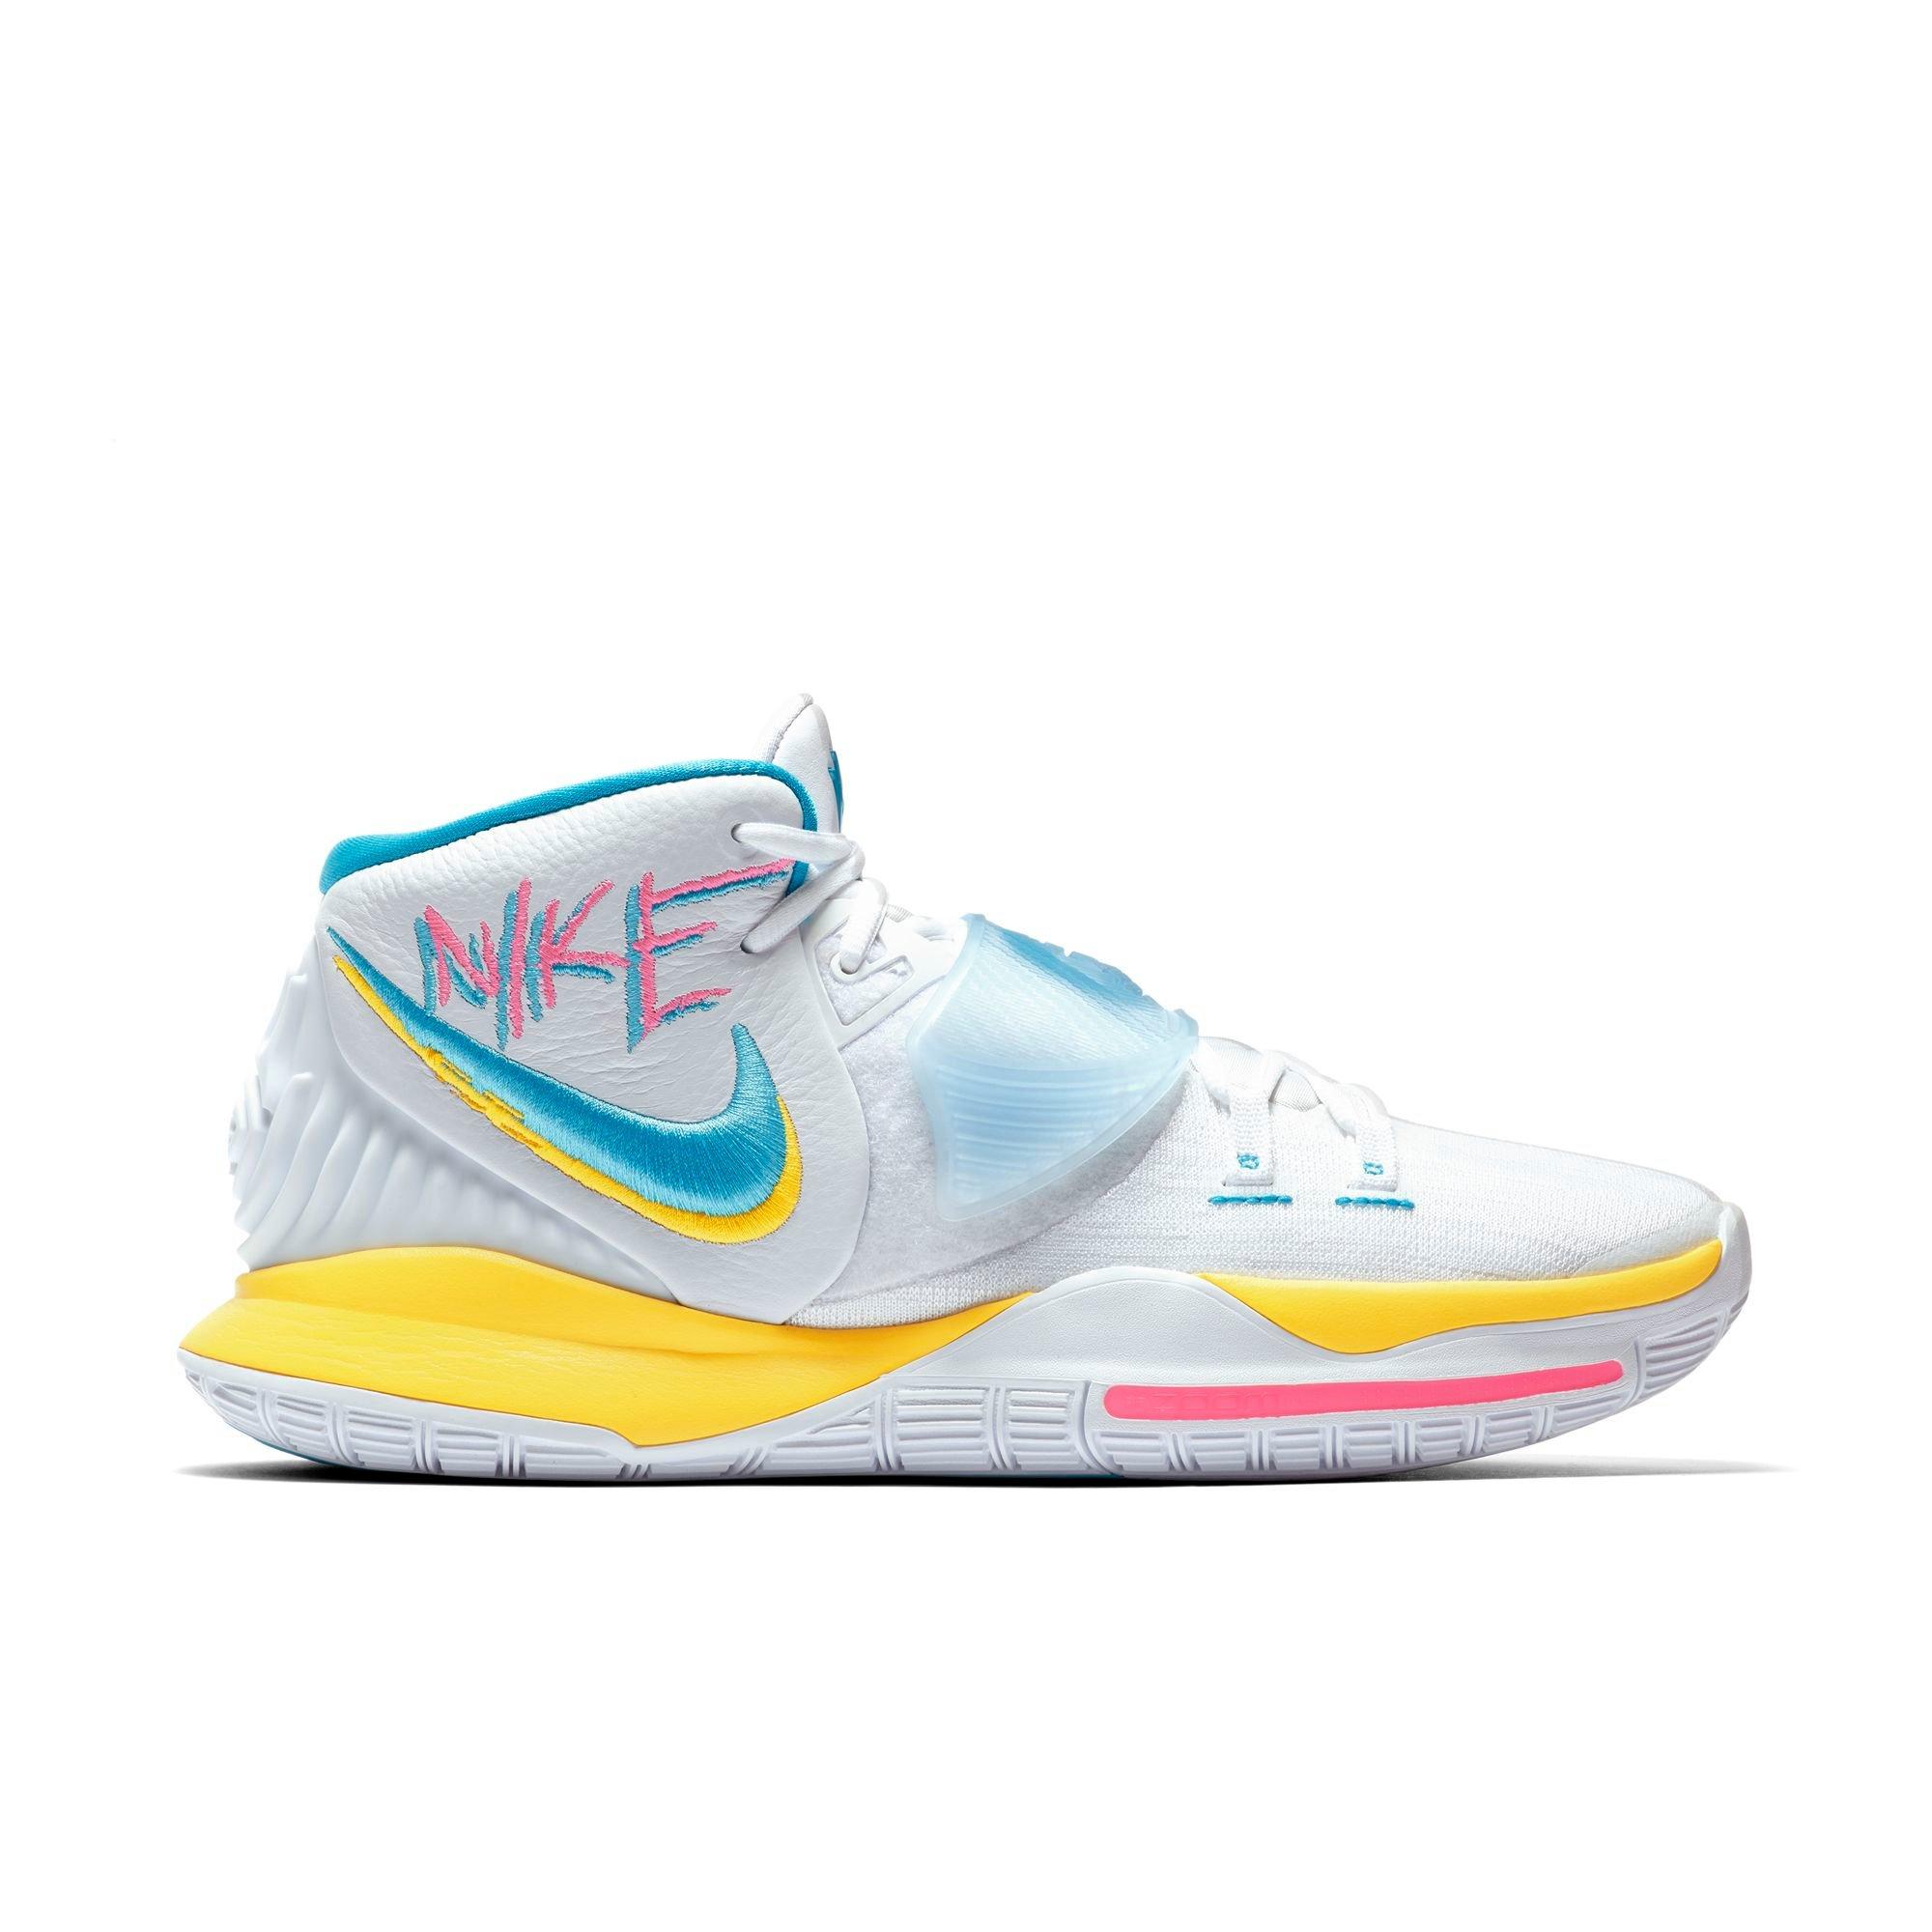 kyrie irving shoes for ladies